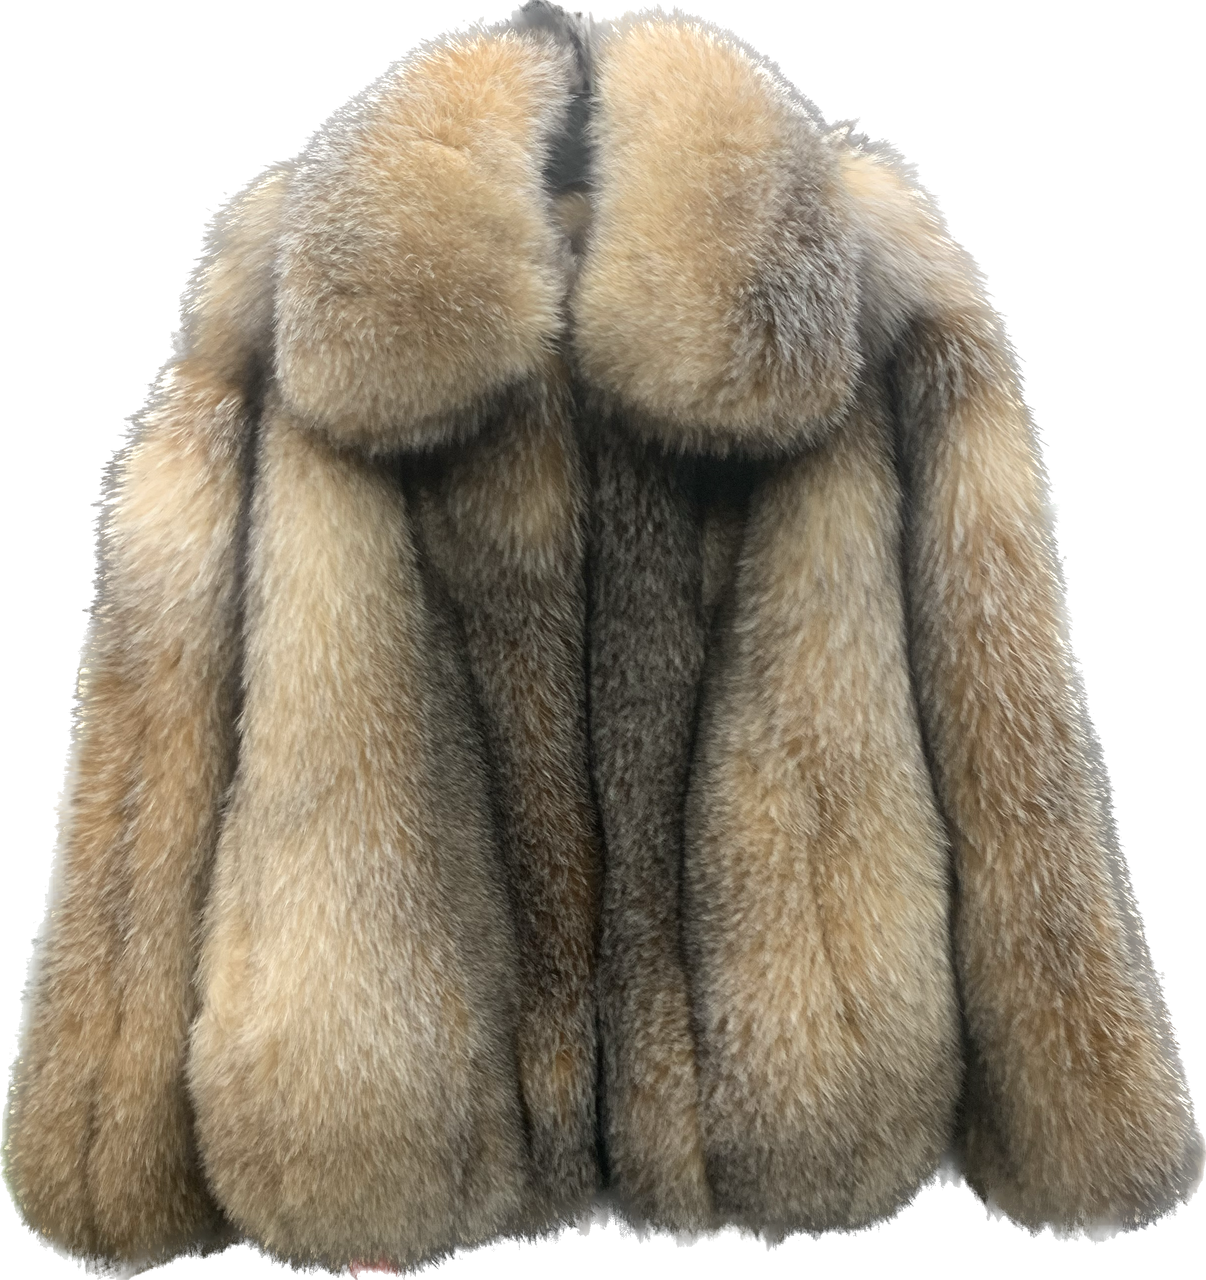 Full Skin Men's Crystal Fox Fur Jacket - furoutlet - fur coat, fur jackets,  fur hats, prices subject to change without notice, so order now!